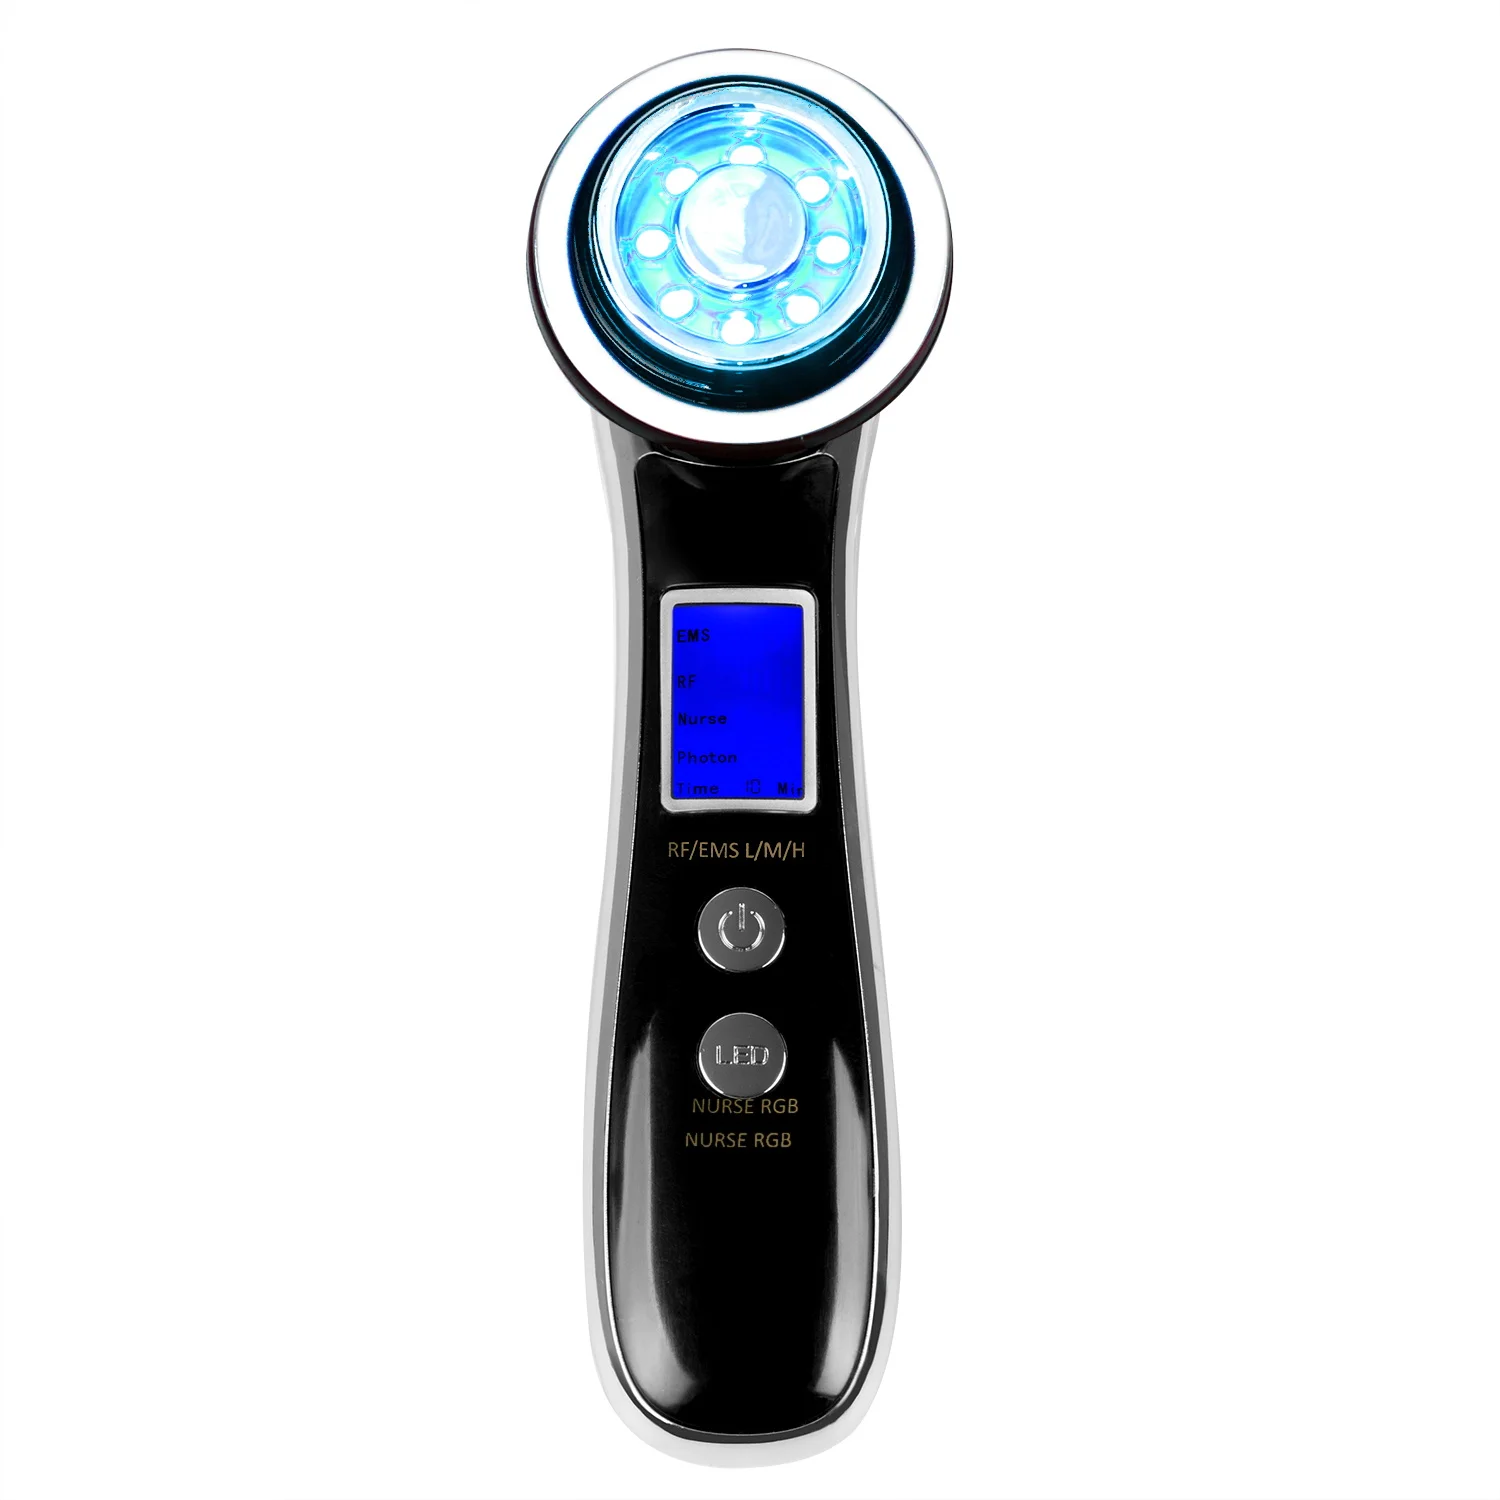 

Unisex Home Rf Skin Care Beauty Massage Anti Aging Led Light Threapy Face Tightening Wrinkle Removal Instrument, Black/customize